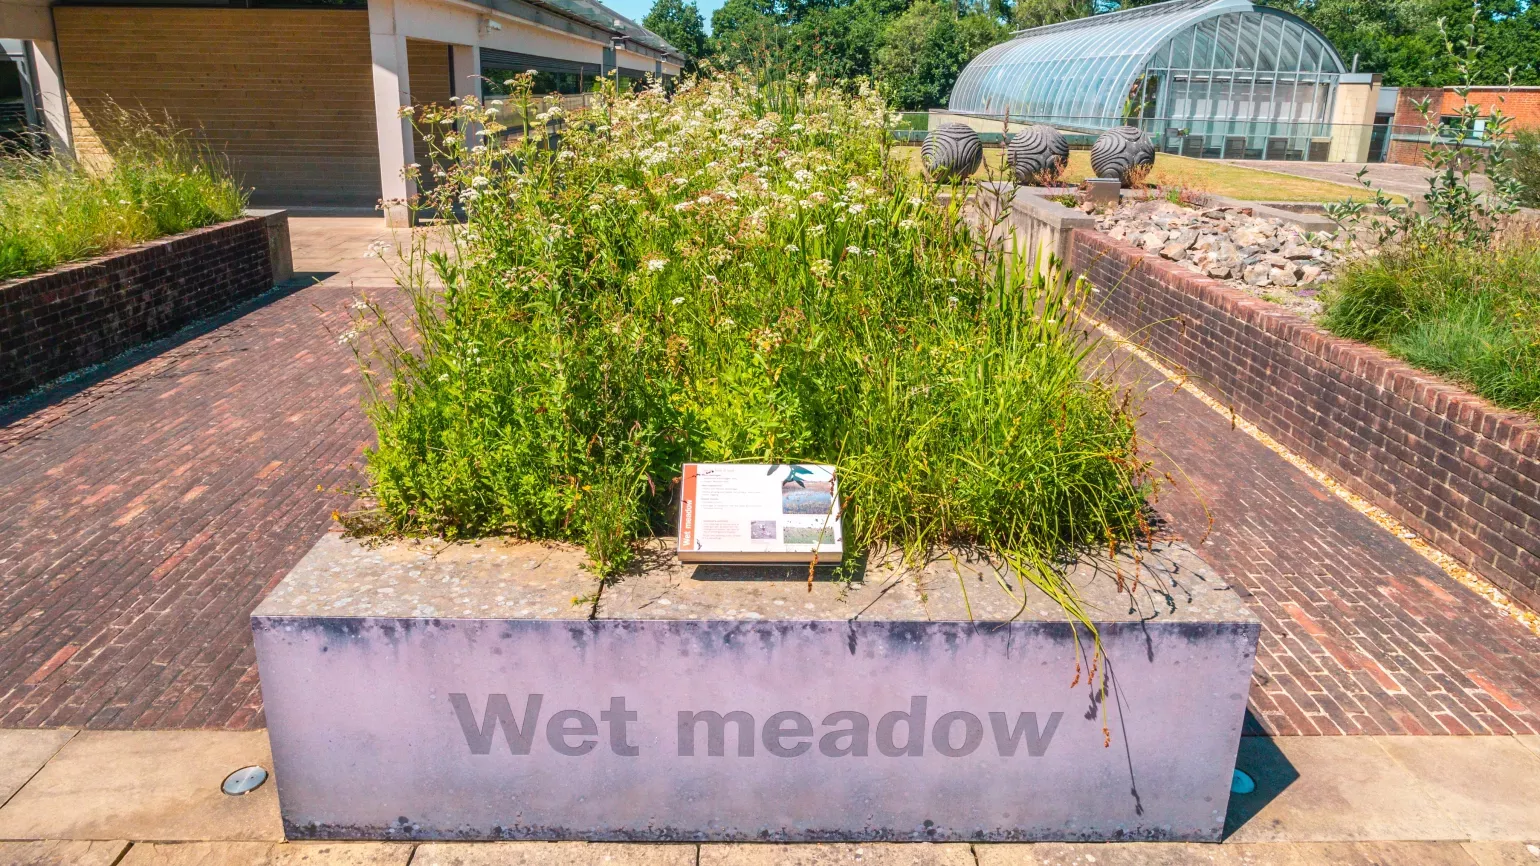 A planting of wet meadow plants